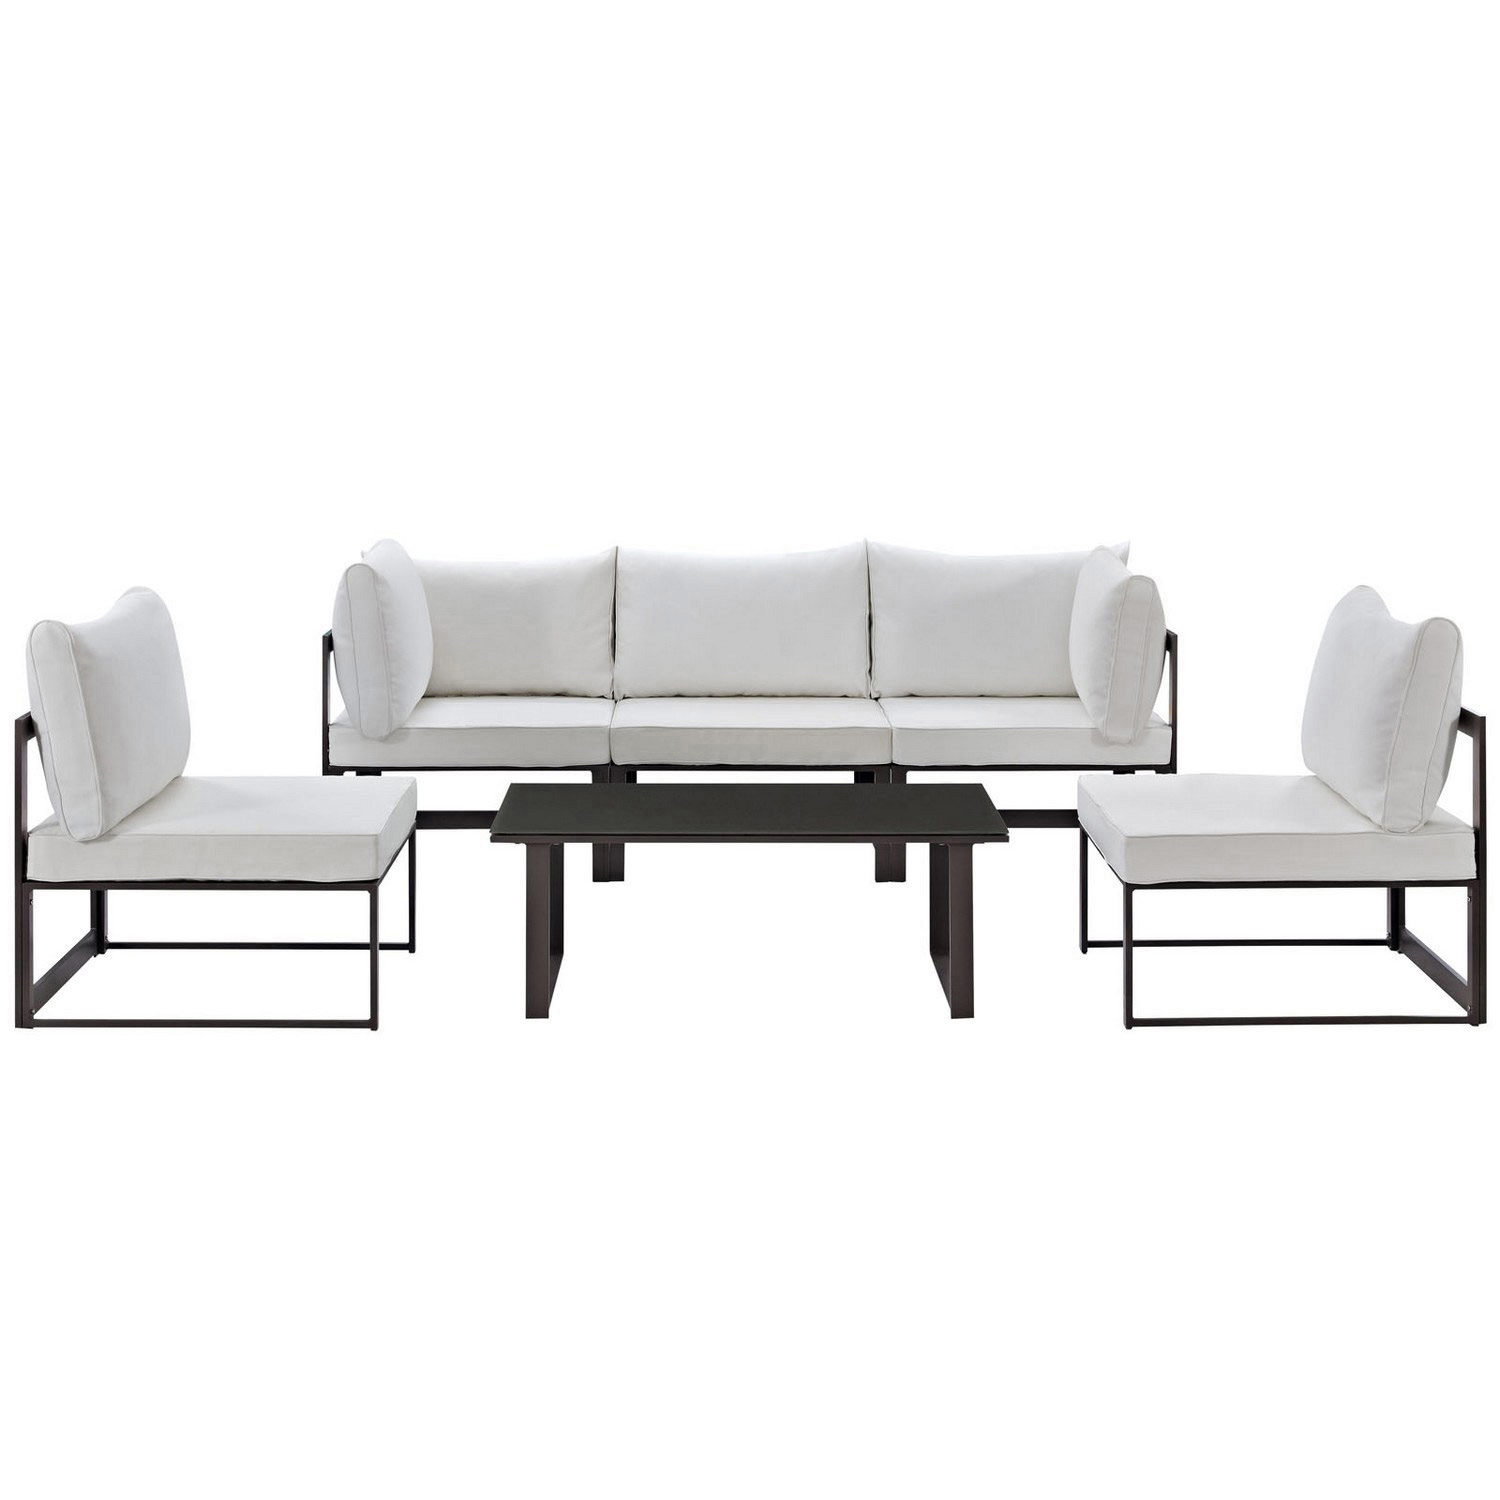 Modway Fortuna 6 Piece Outdoor Patio Sectional Sofa Set - Brown/White